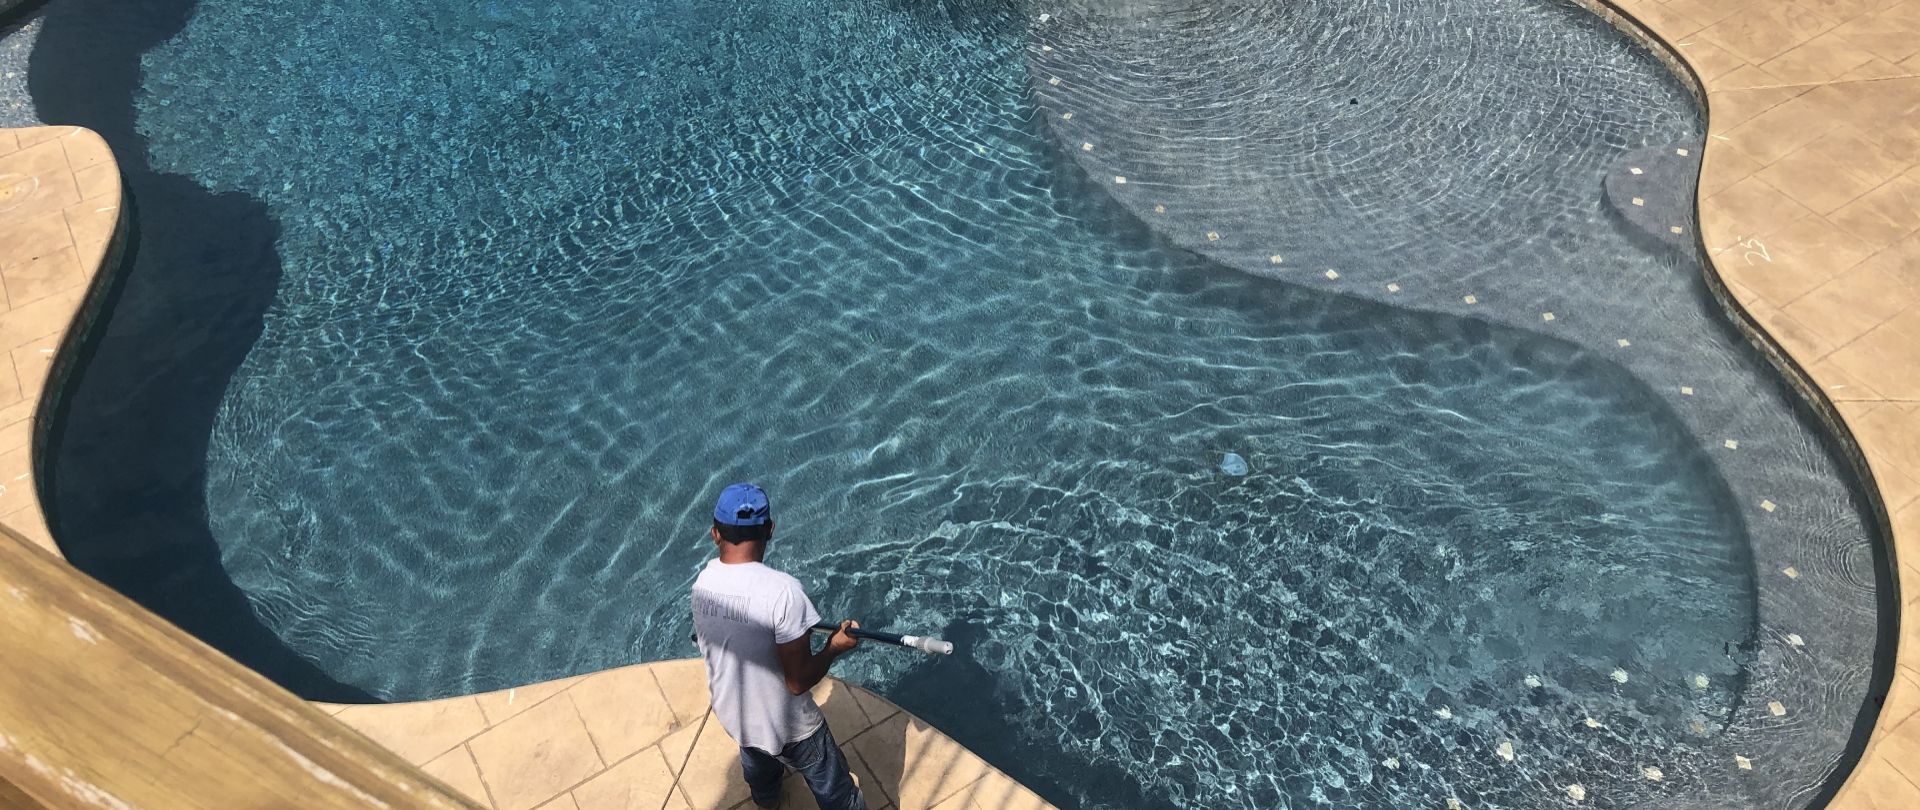 Pool Cleaning